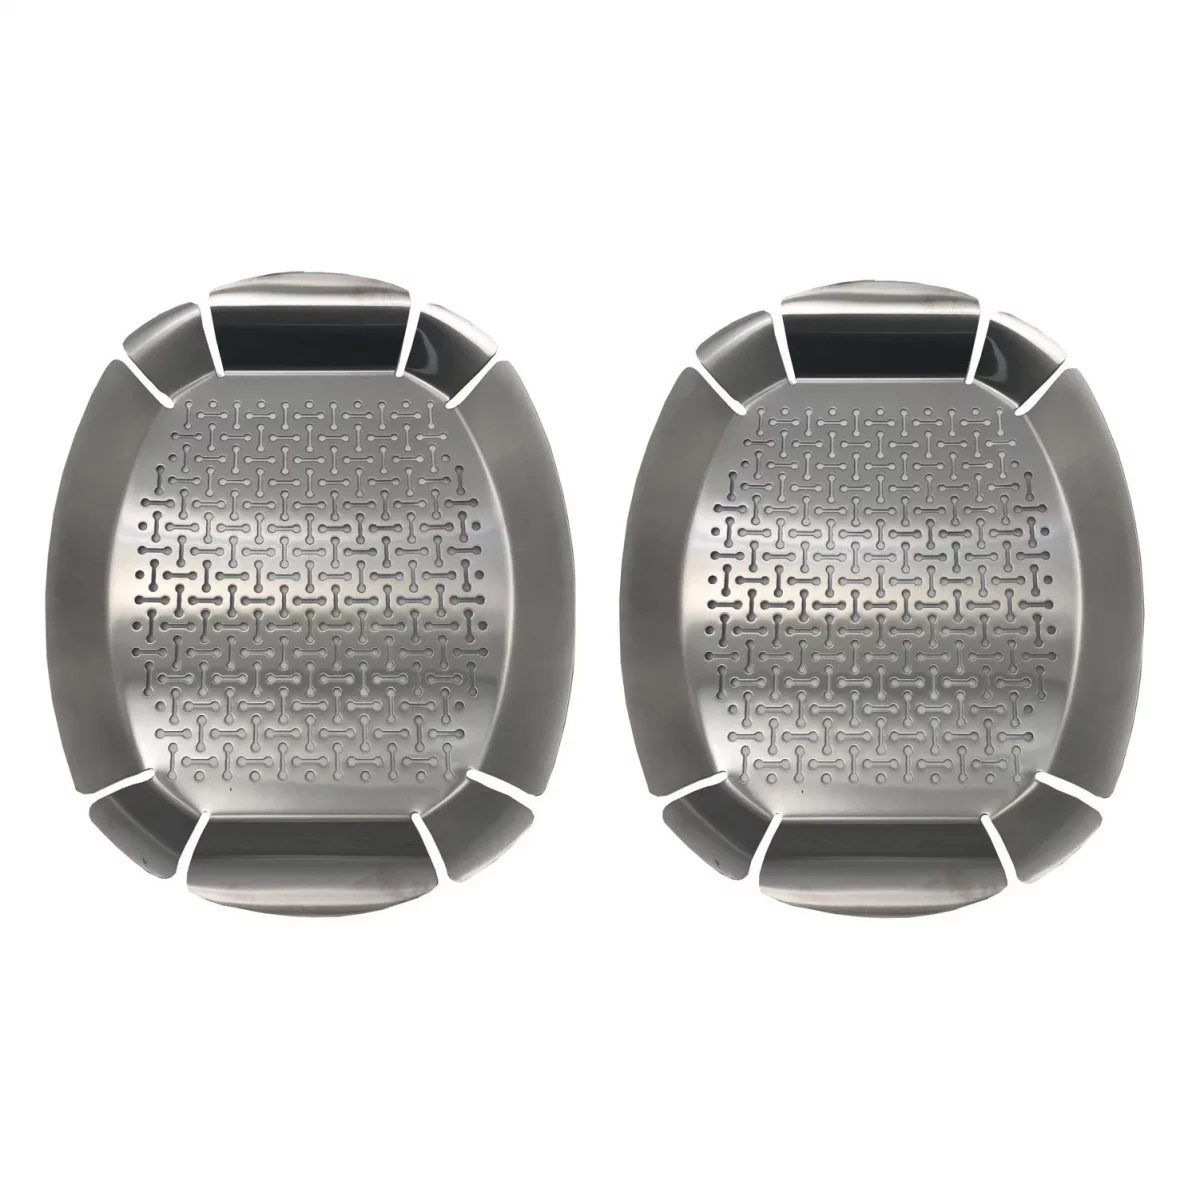 BBQ Grilling Baskerts / 2 Pack / Stainless Steel / Vegetable Grilling